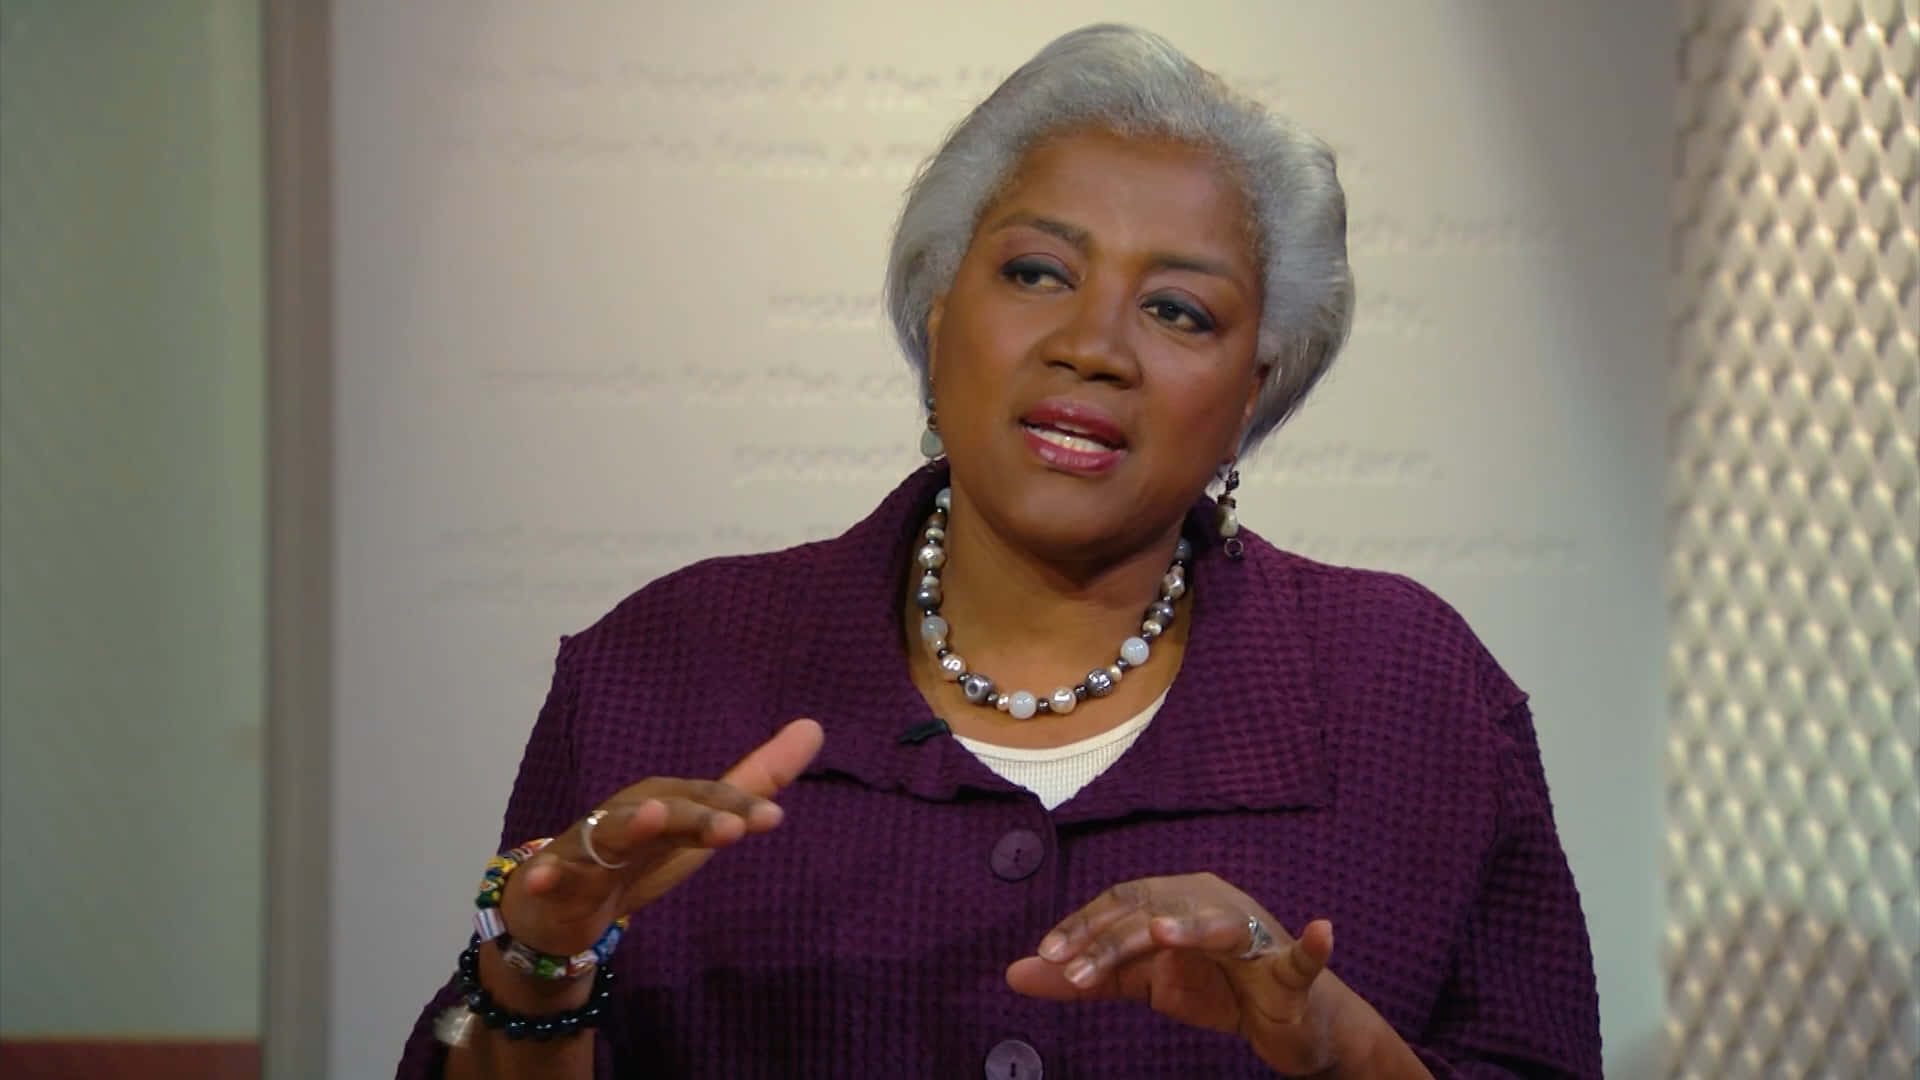 Donna Brazile At An Event, Addressing The Audience With Her Insightful Speech. Wallpaper